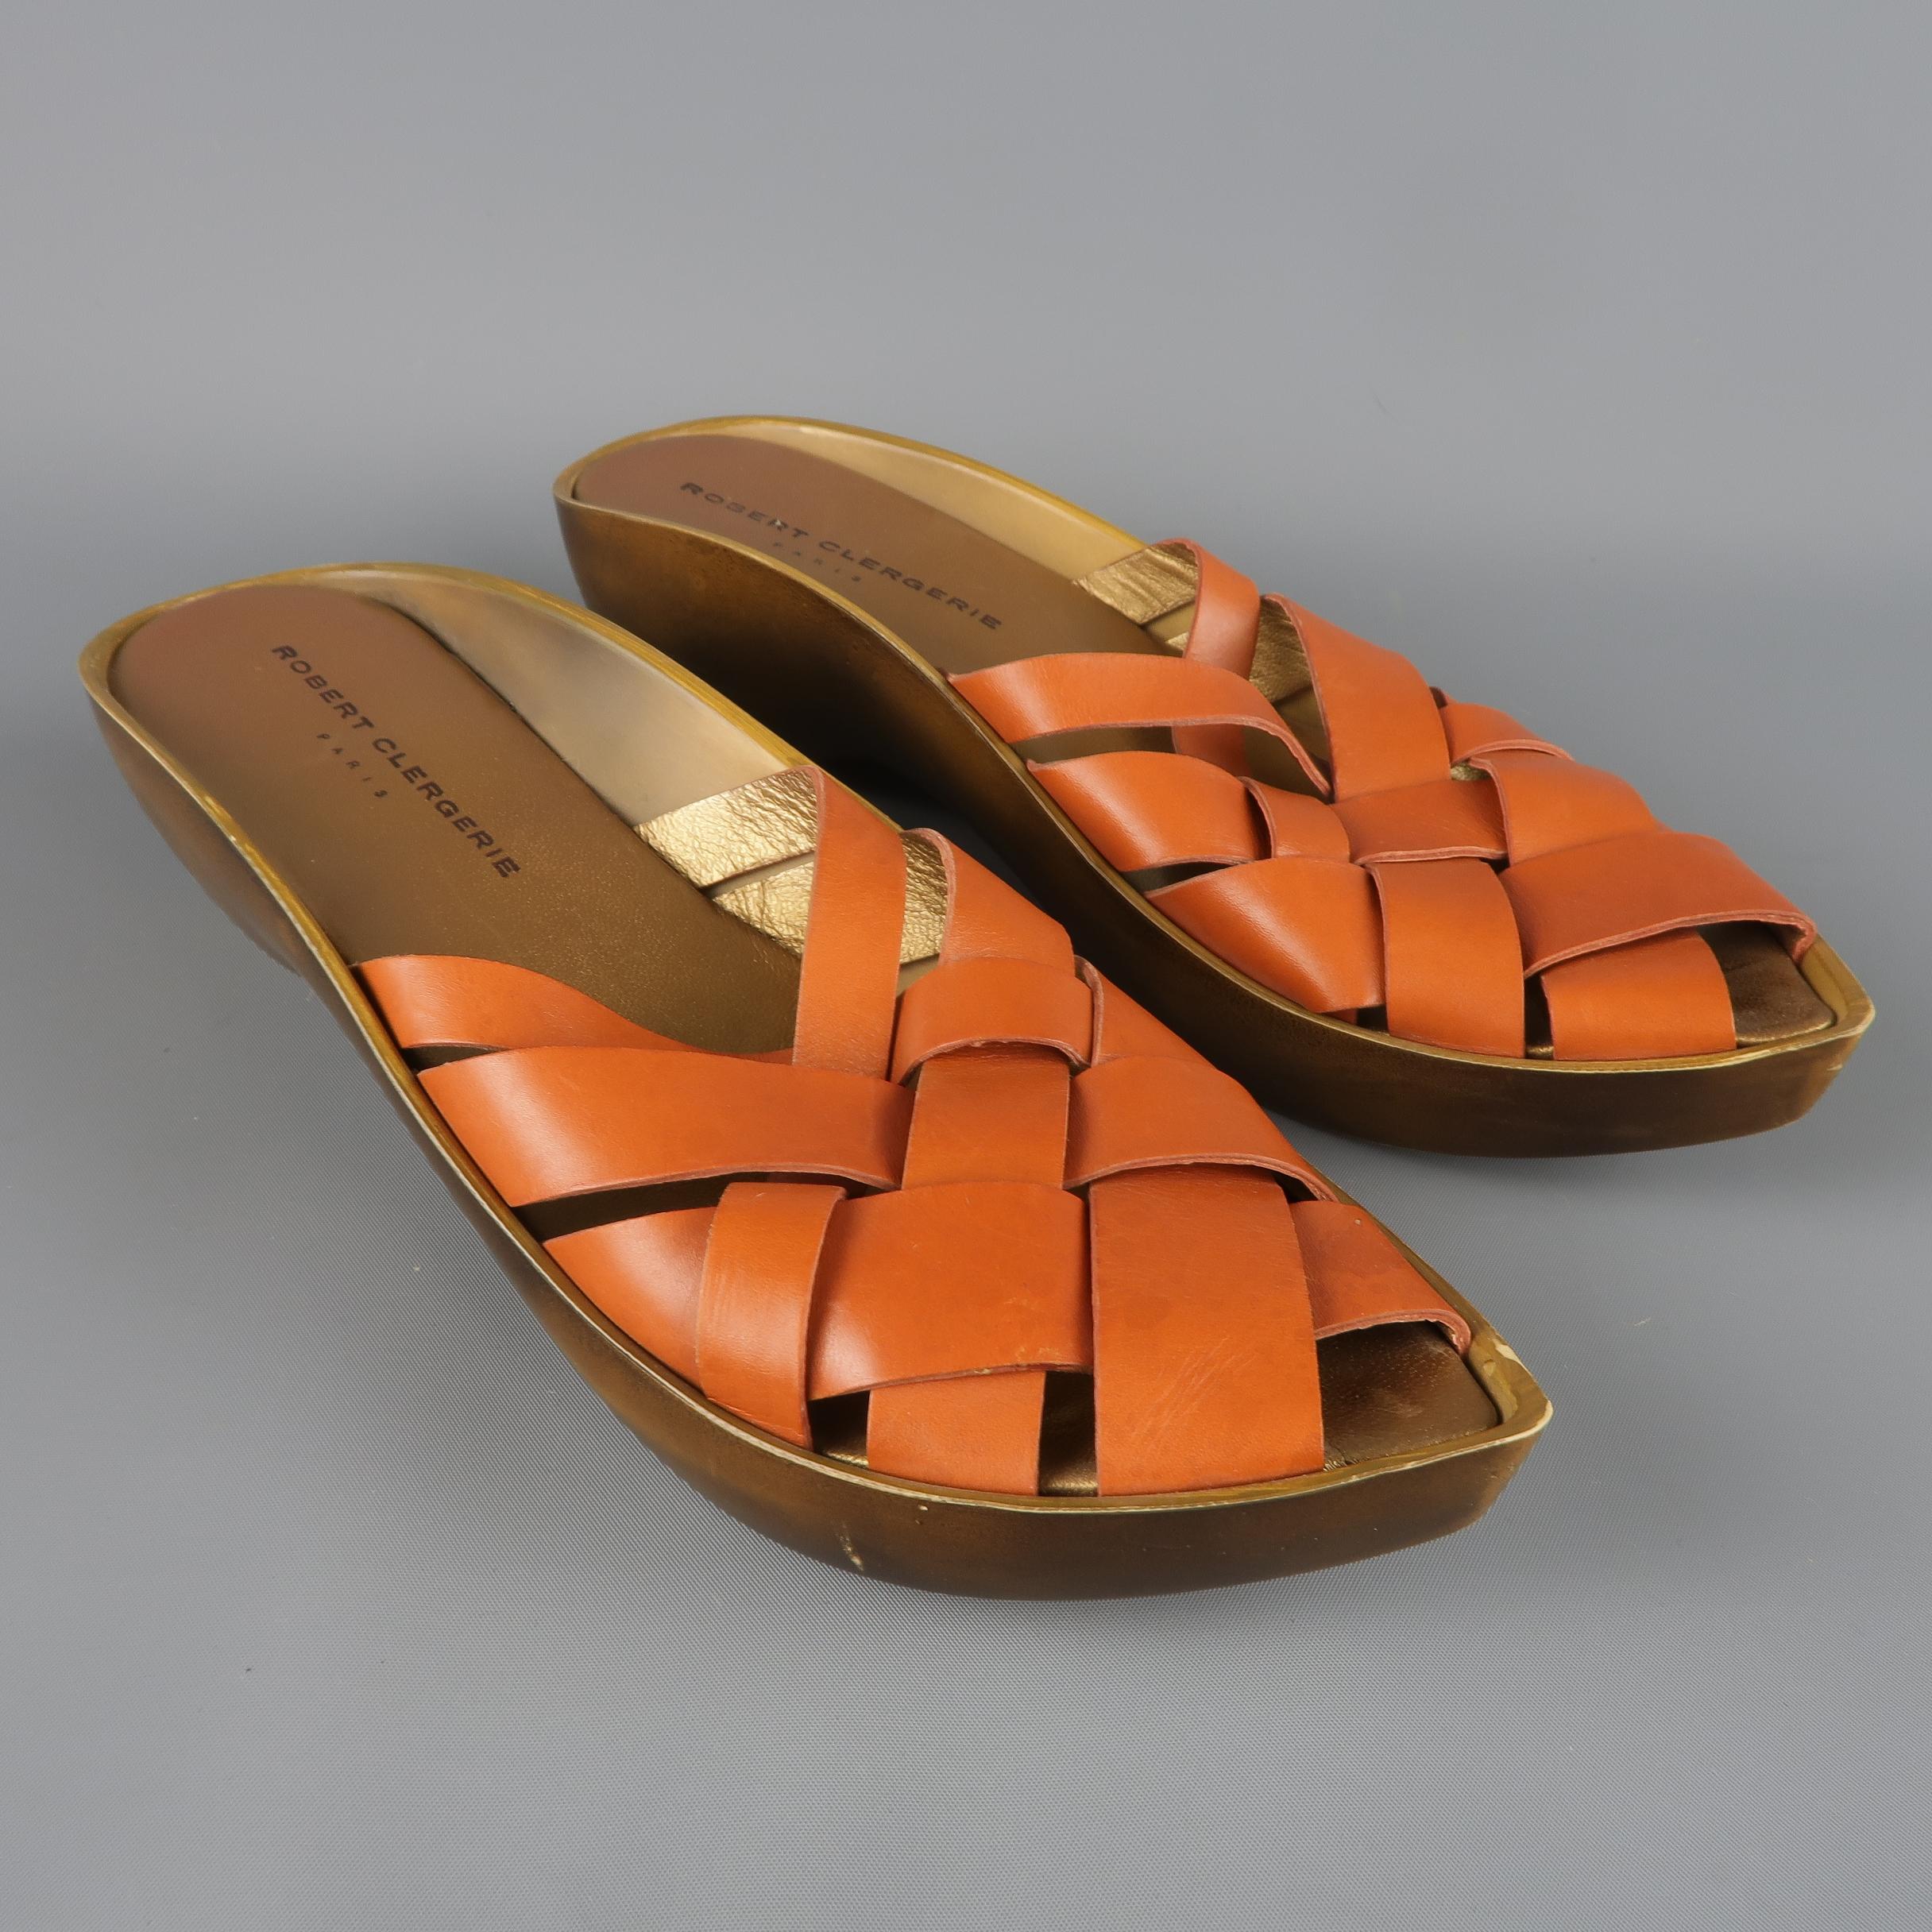 ROBERT CLERGERIE clog sandals feature a metallic clog style platform sole with tan woven pointed toe. Wear throughout. Made in France.
 
Good Pre-Owned Condition.
Marked: 10